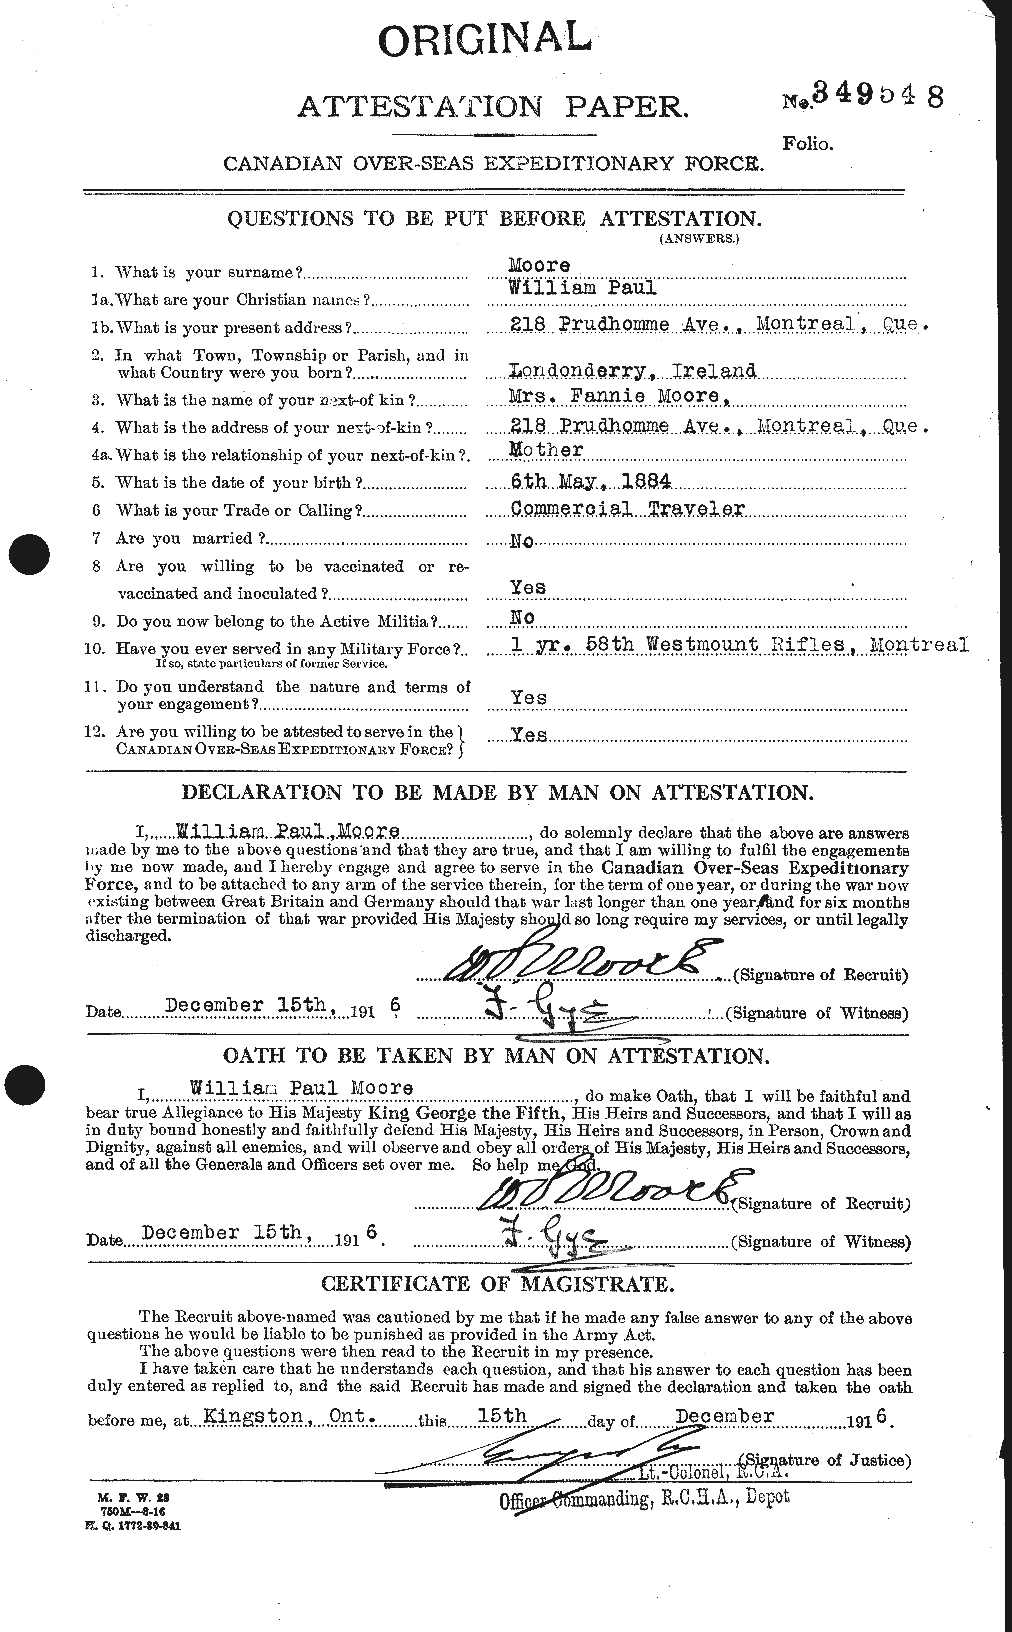 Personnel Records of the First World War - CEF 505859a